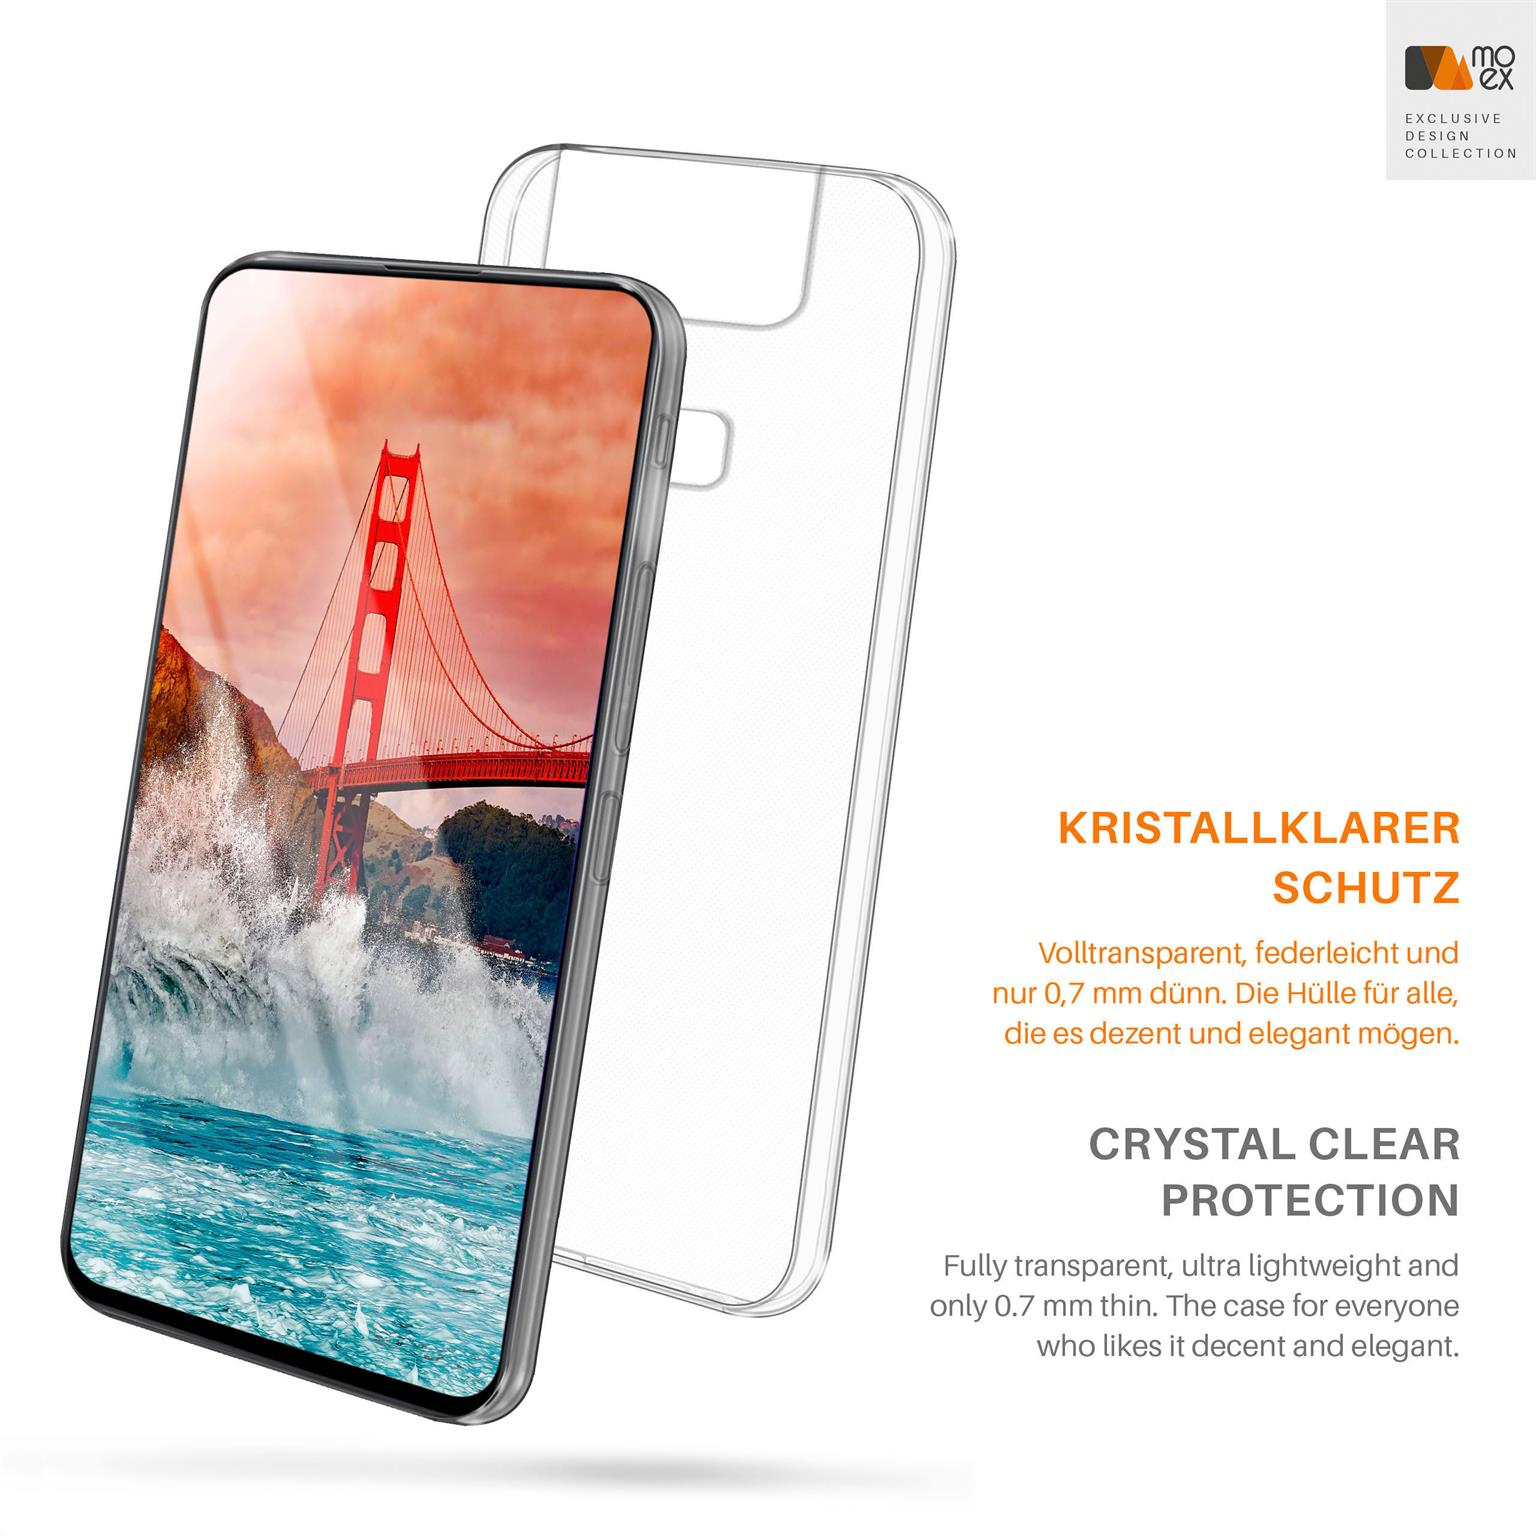 MOEX Aero Zenfone 6 Case, Crystal-Clear Backcover, (2019), ASUS, Asus